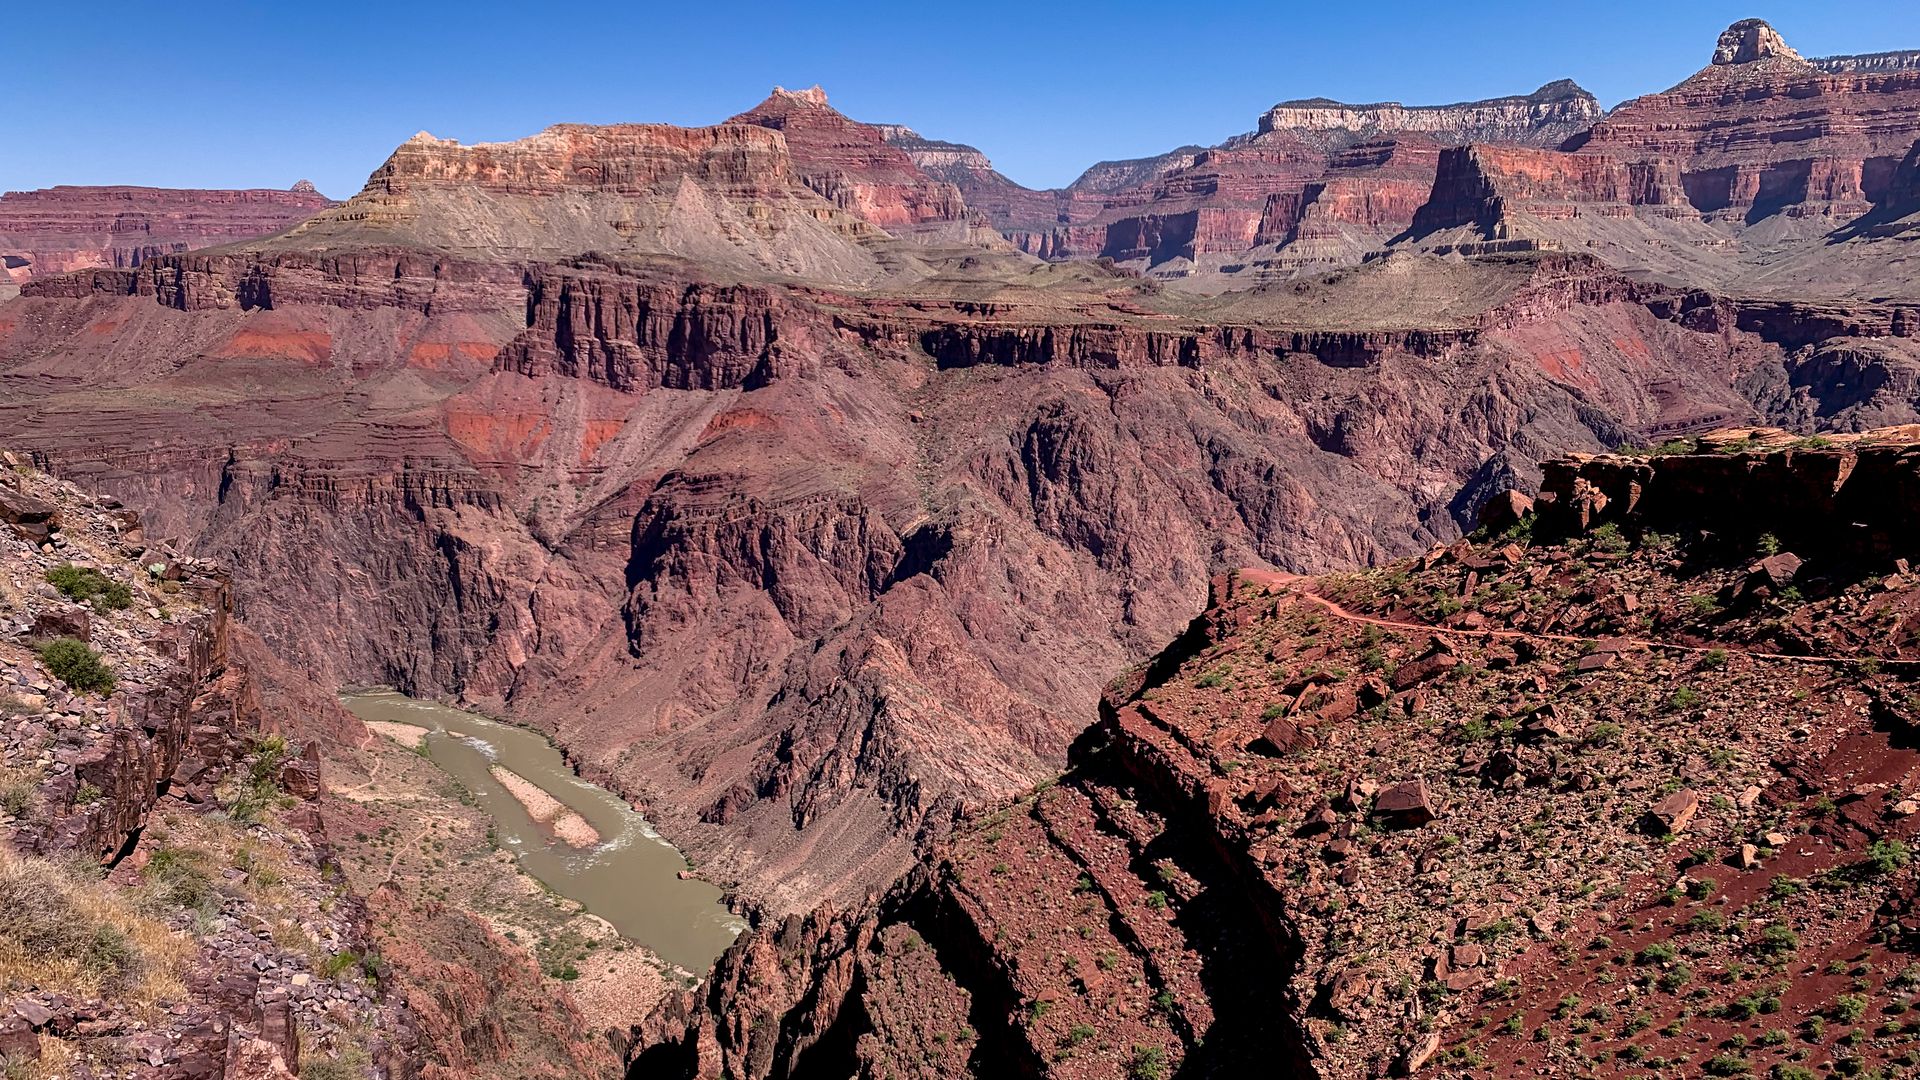 The Colorado River is seen from the South Kaibab Trail along the Grand Canyon South Rim in Arizona, United States on June 21, 2019.